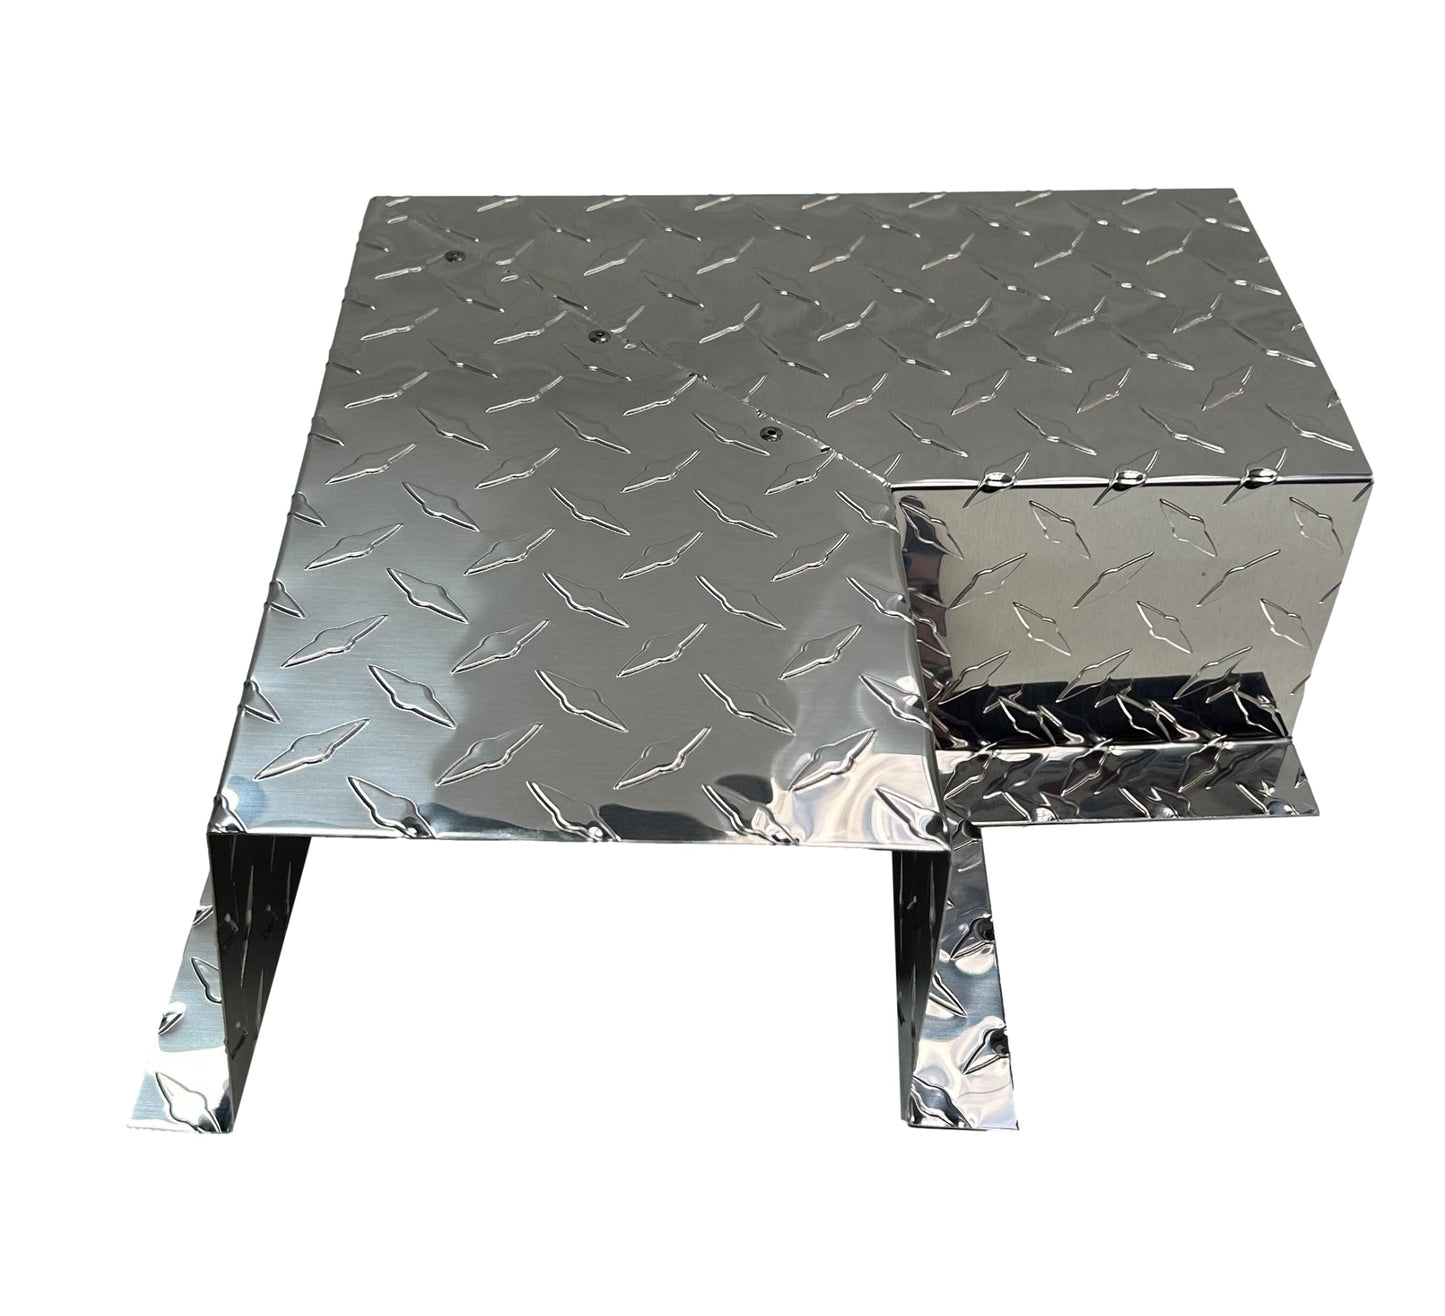 This image shows a rectangular piece of diamond plate steel with multiple bends, creating sections that appear to form legs and a separate column. The metal, often used in the Perma Cover Residential Series - Line Set Cover Side Turning Elbows - Premium Quality for HVAC line sets, has a shiny, reflective surface with a textured diamond pattern.